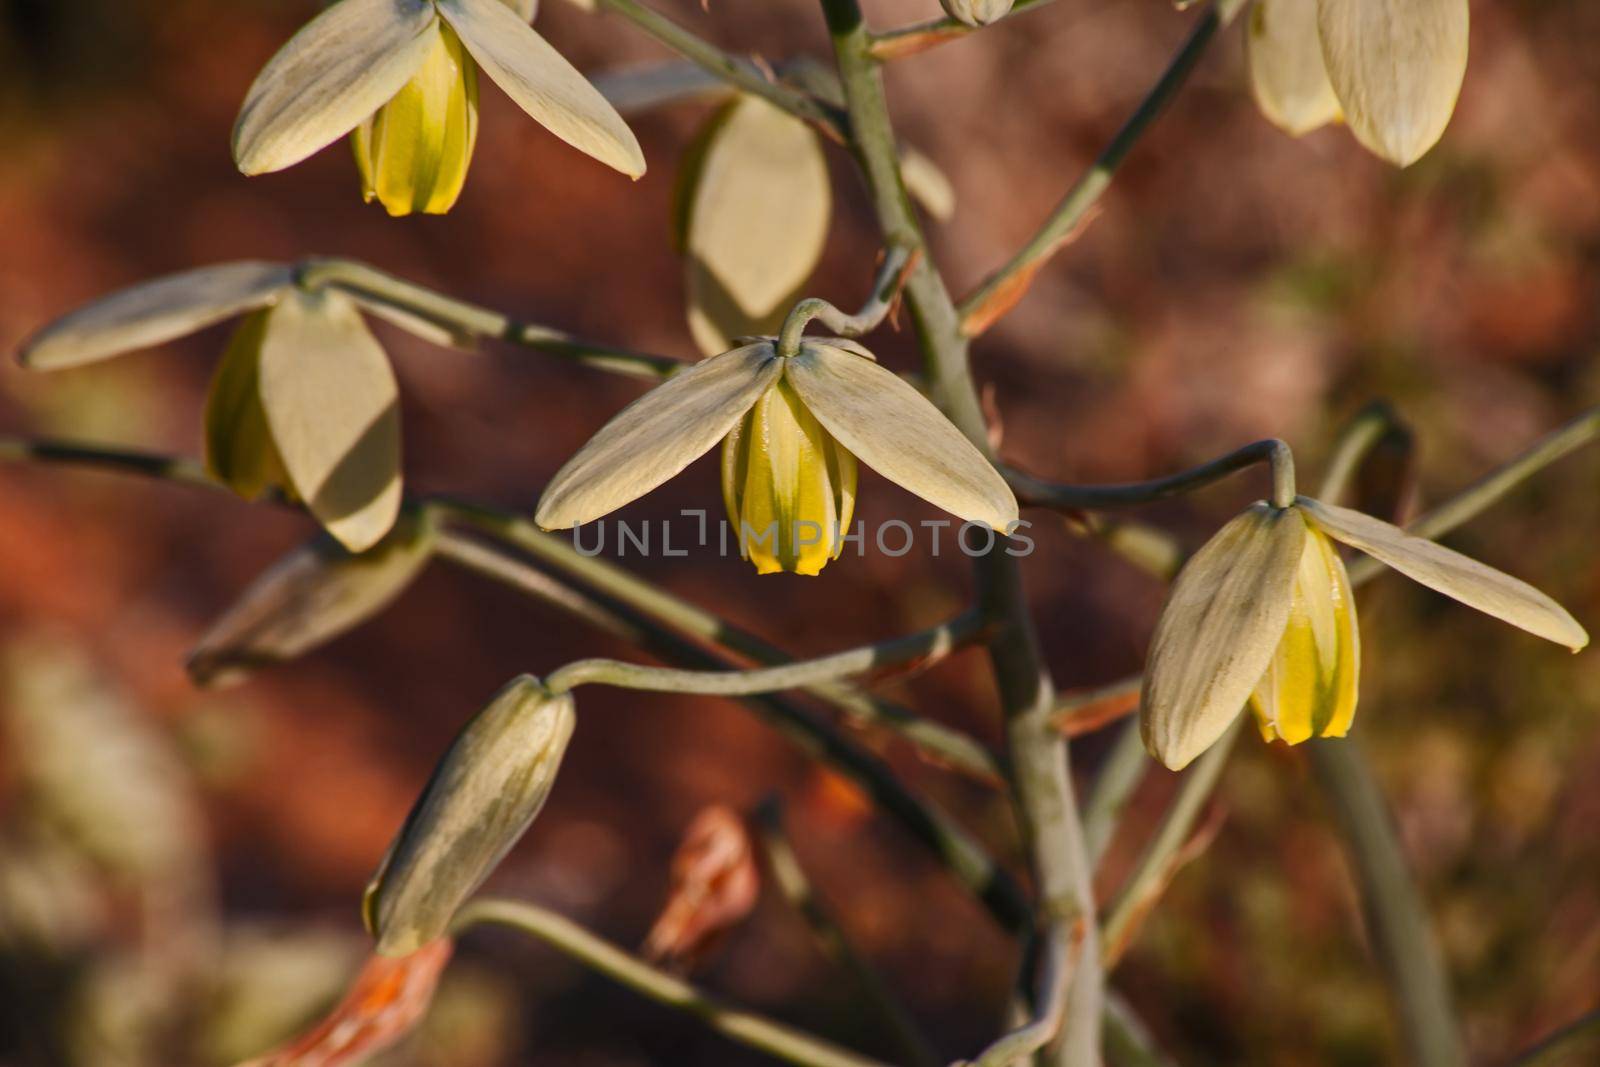 Albuca flaccida is a summer dormant, drought tolerant bulb from South Africa.